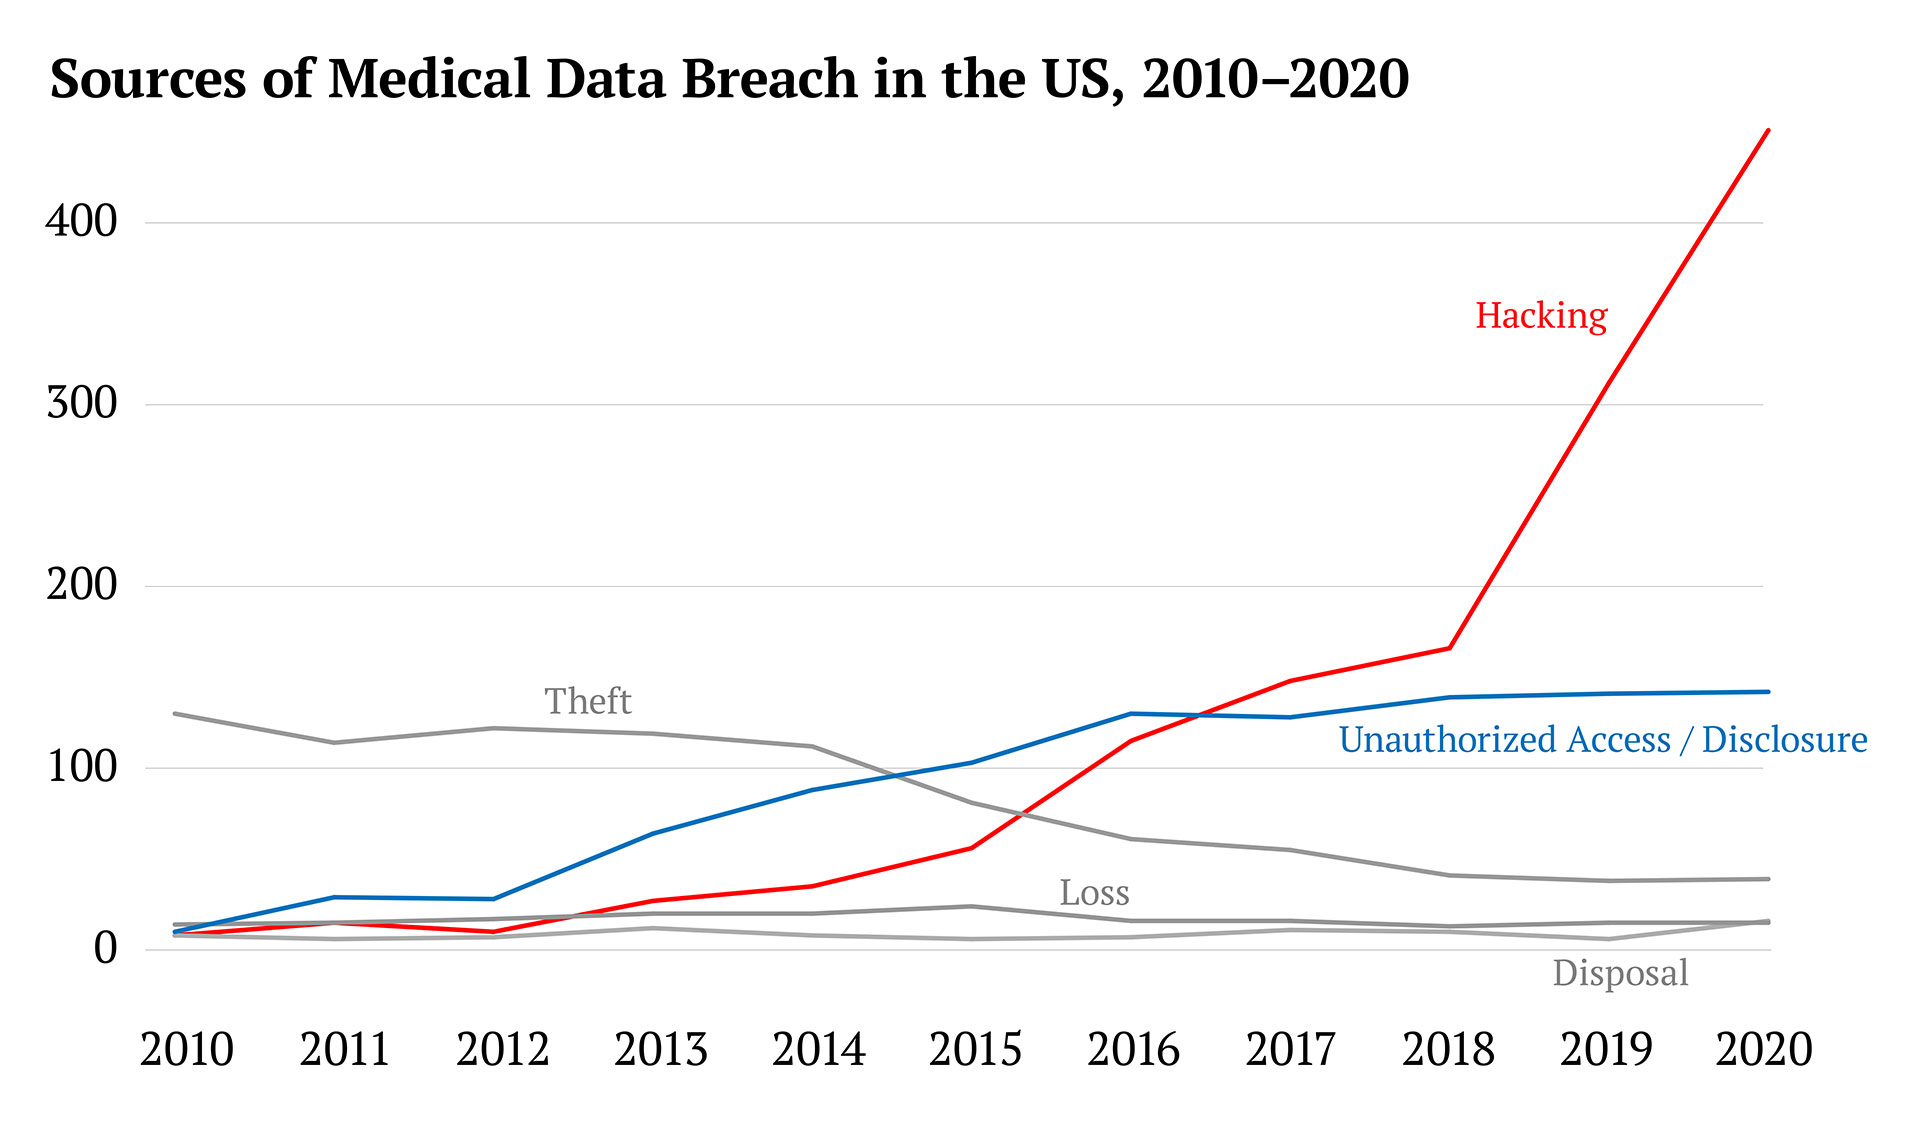 Line chart of the sources of medical data breach in the US from 2010 through 2020